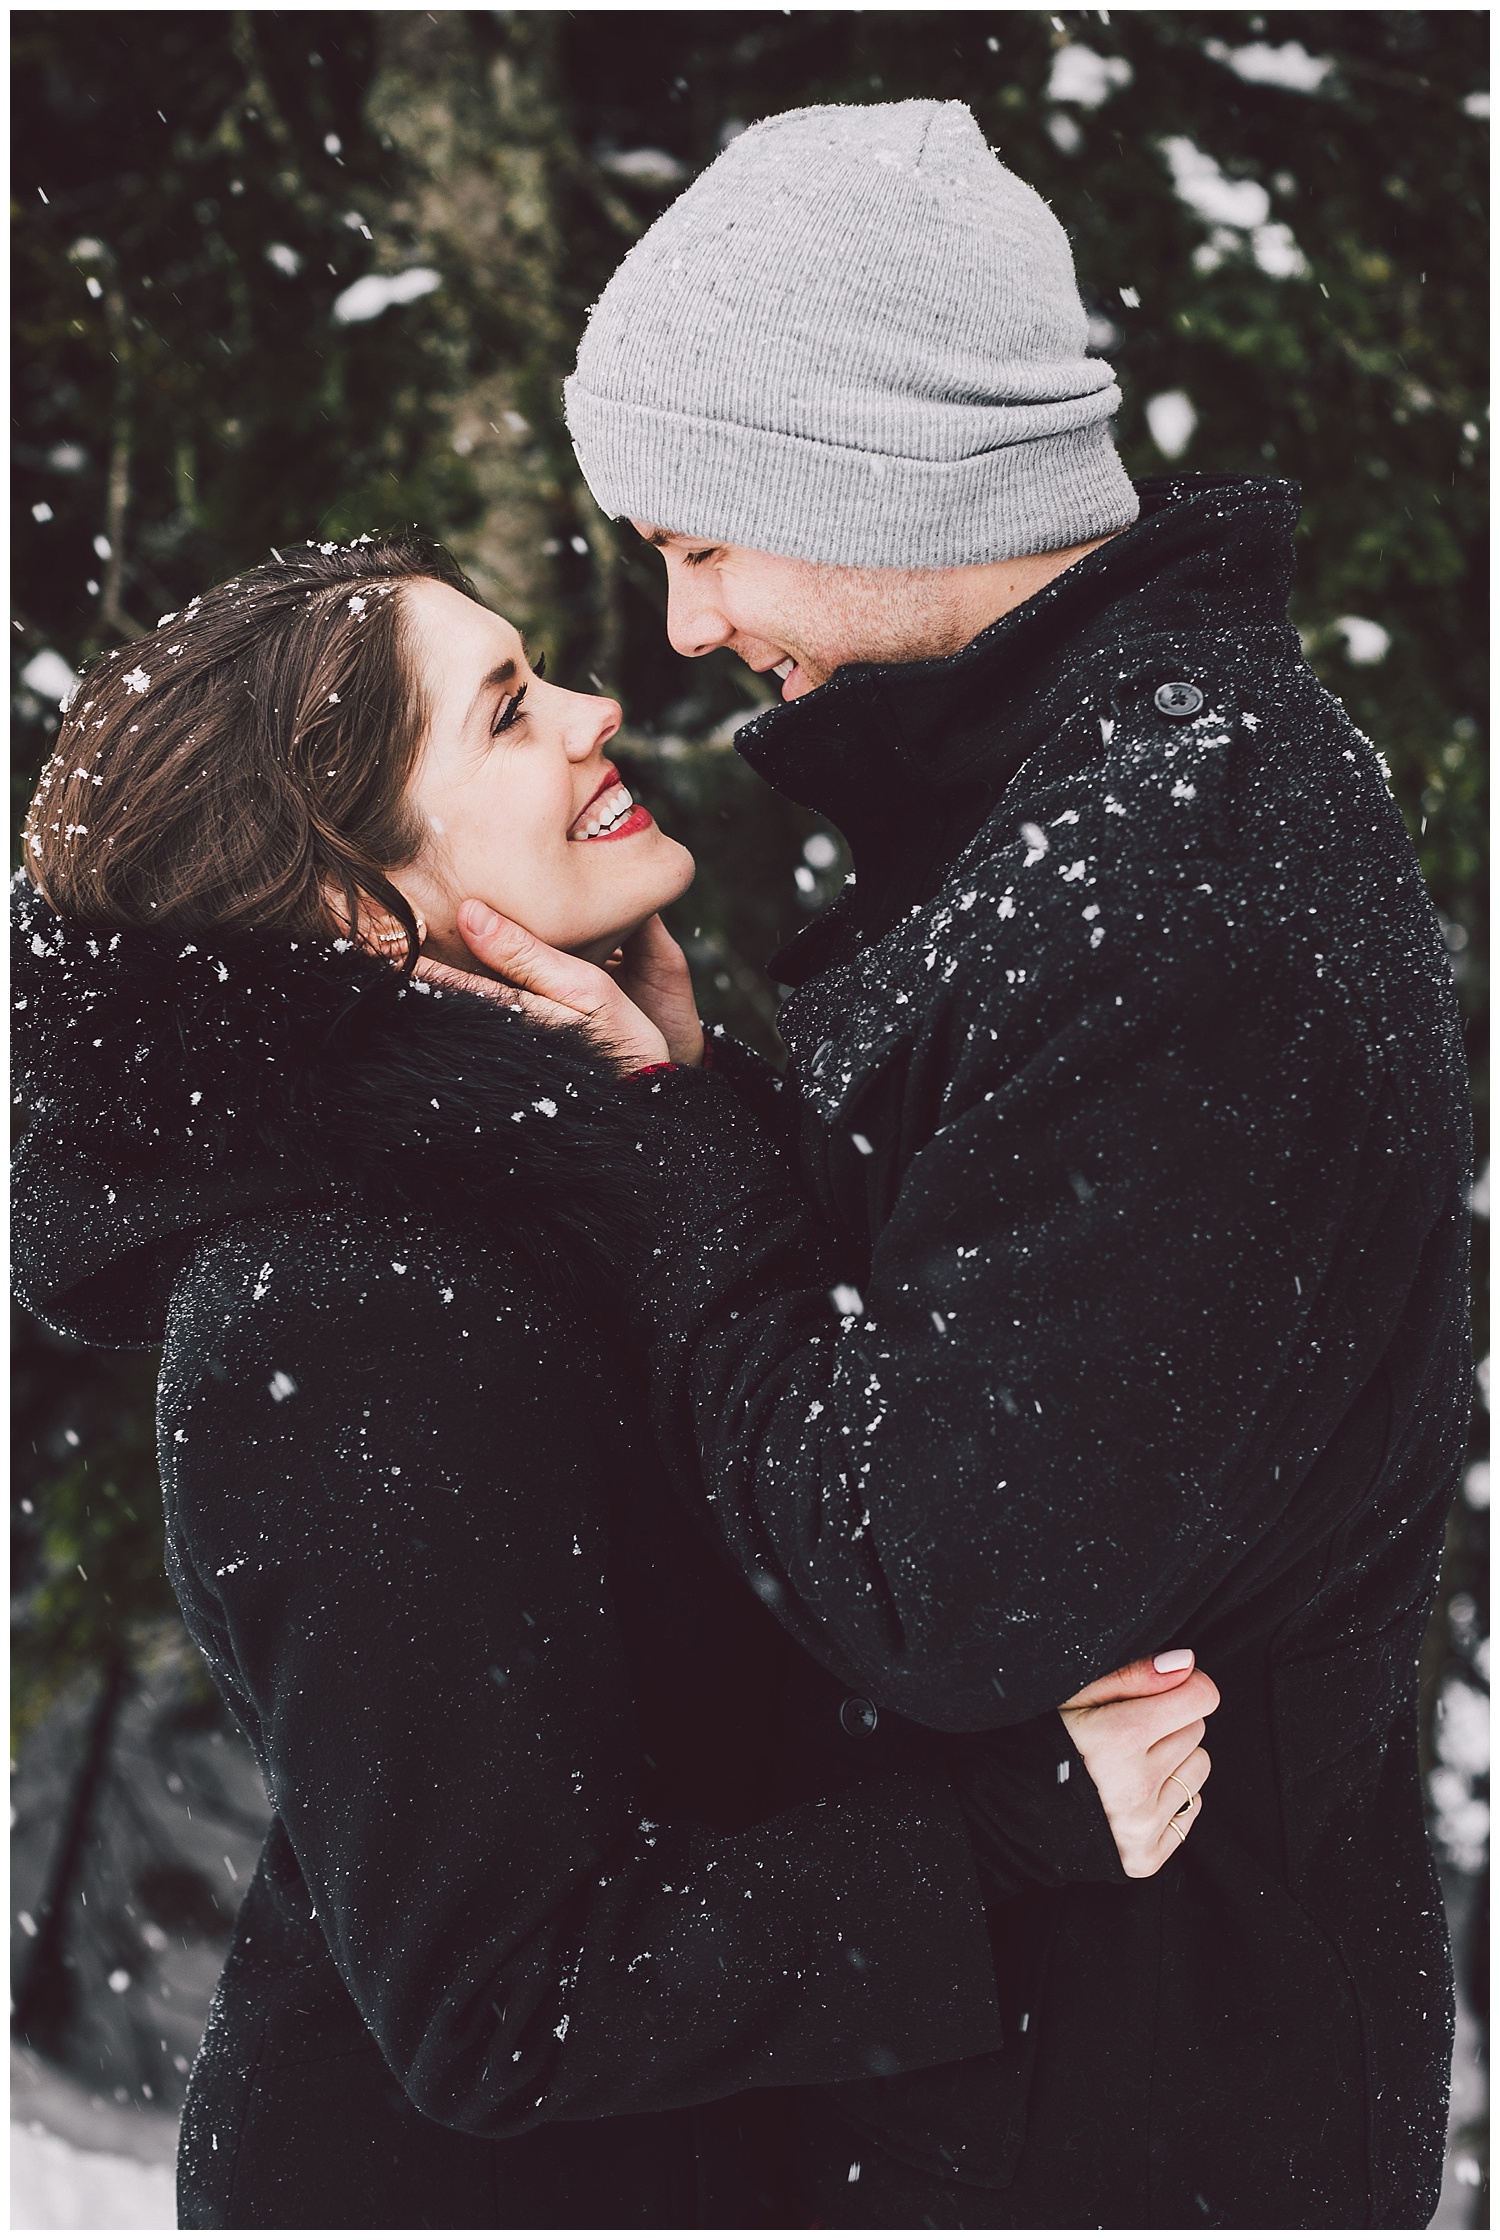 Smiling in the snow during their engagement photos